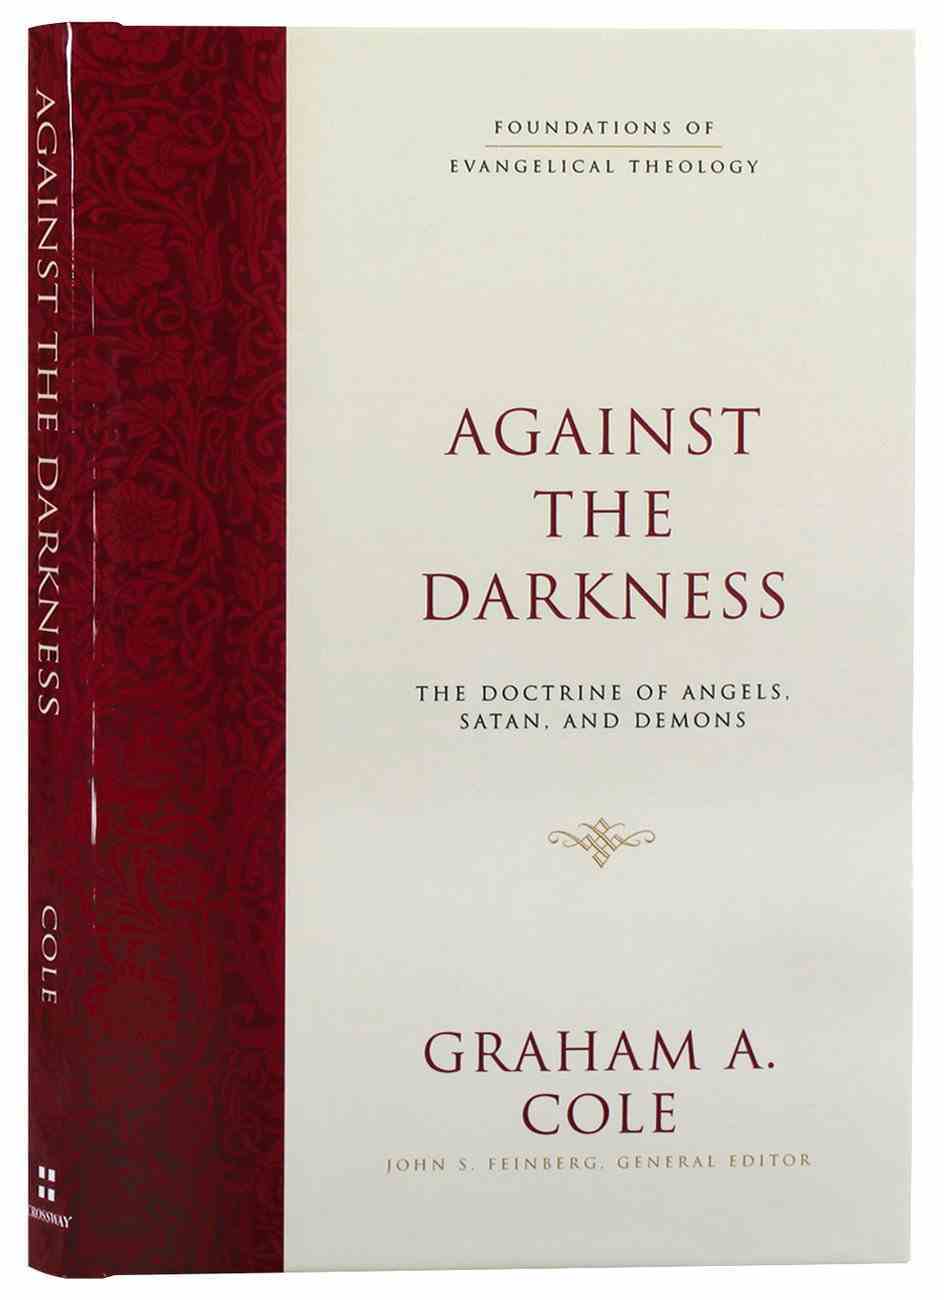 Against the Darkness: The Doctrine of Angels, Satan, and Demons (Foundations Of Evangelical Theology Series) Hardback